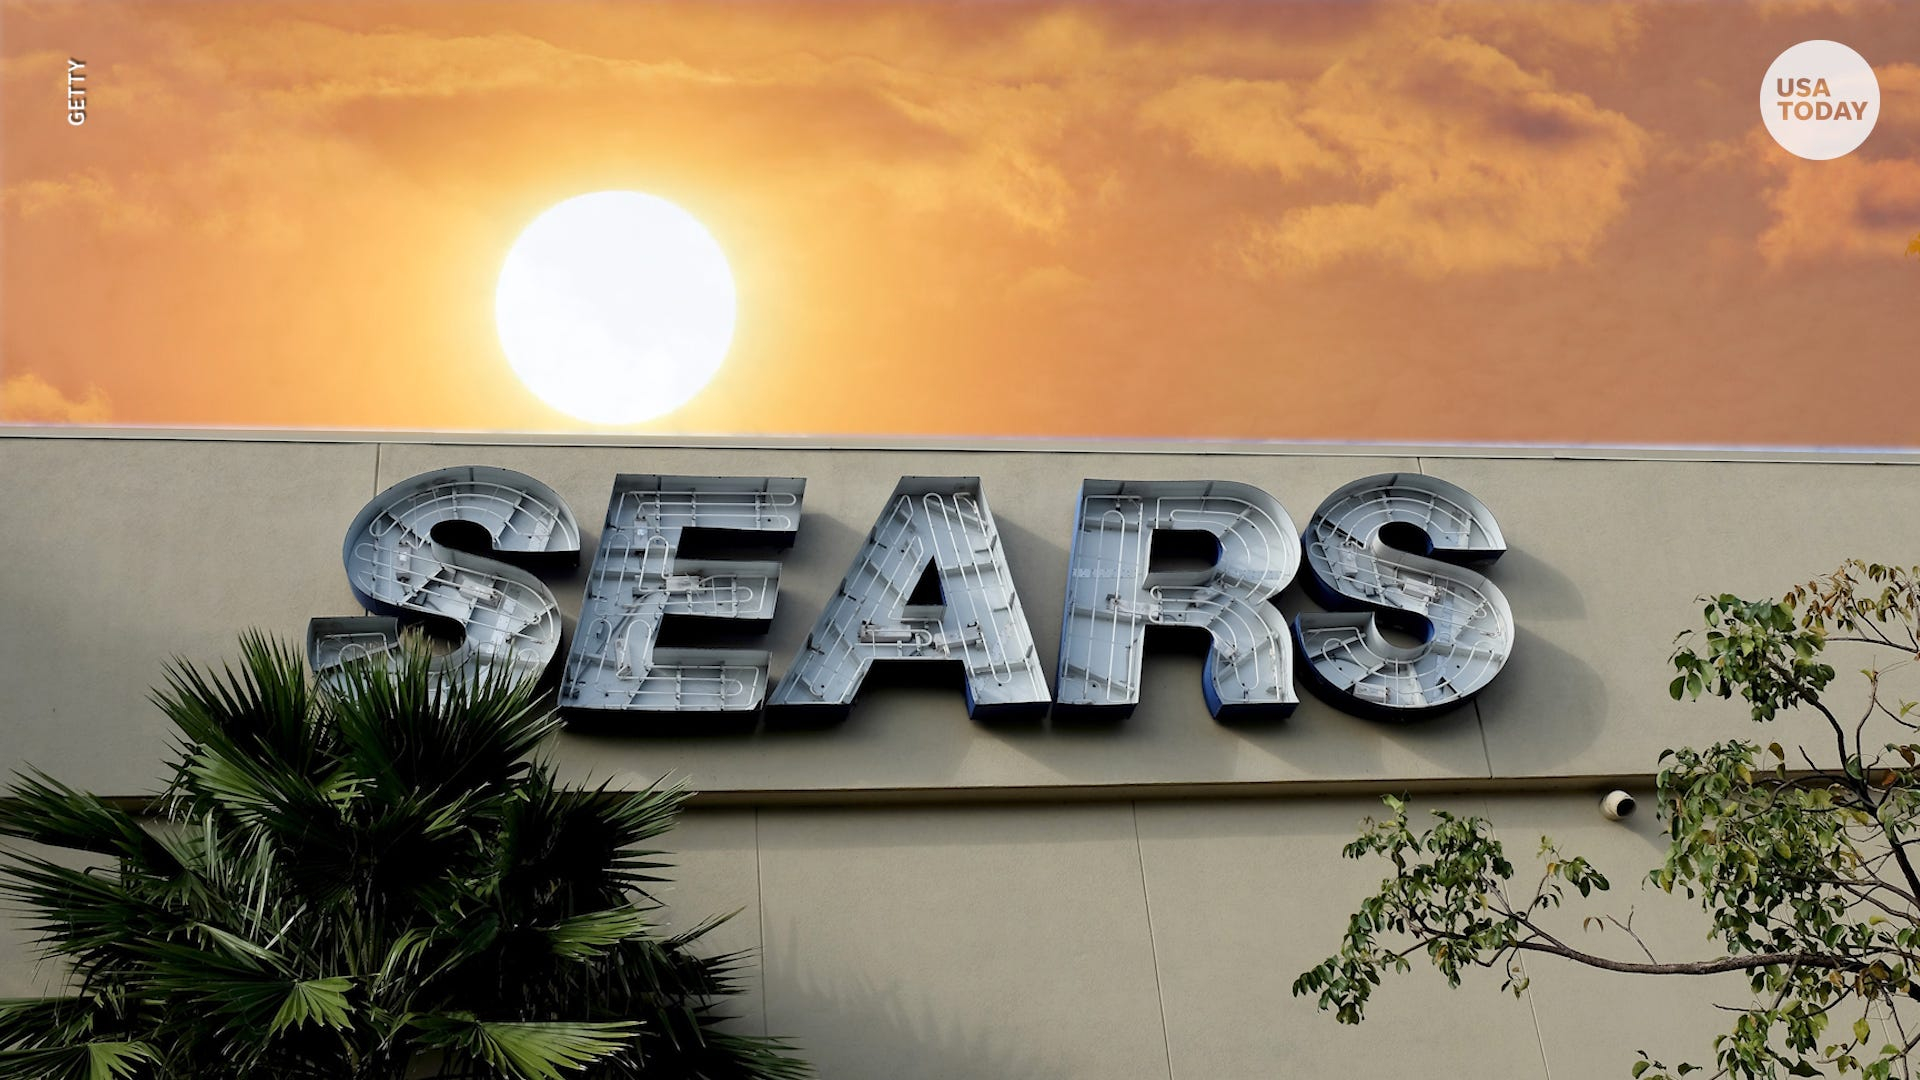 Sears Protection Agreement Number Why Seeing Sears Stores Close Hurts Hearts